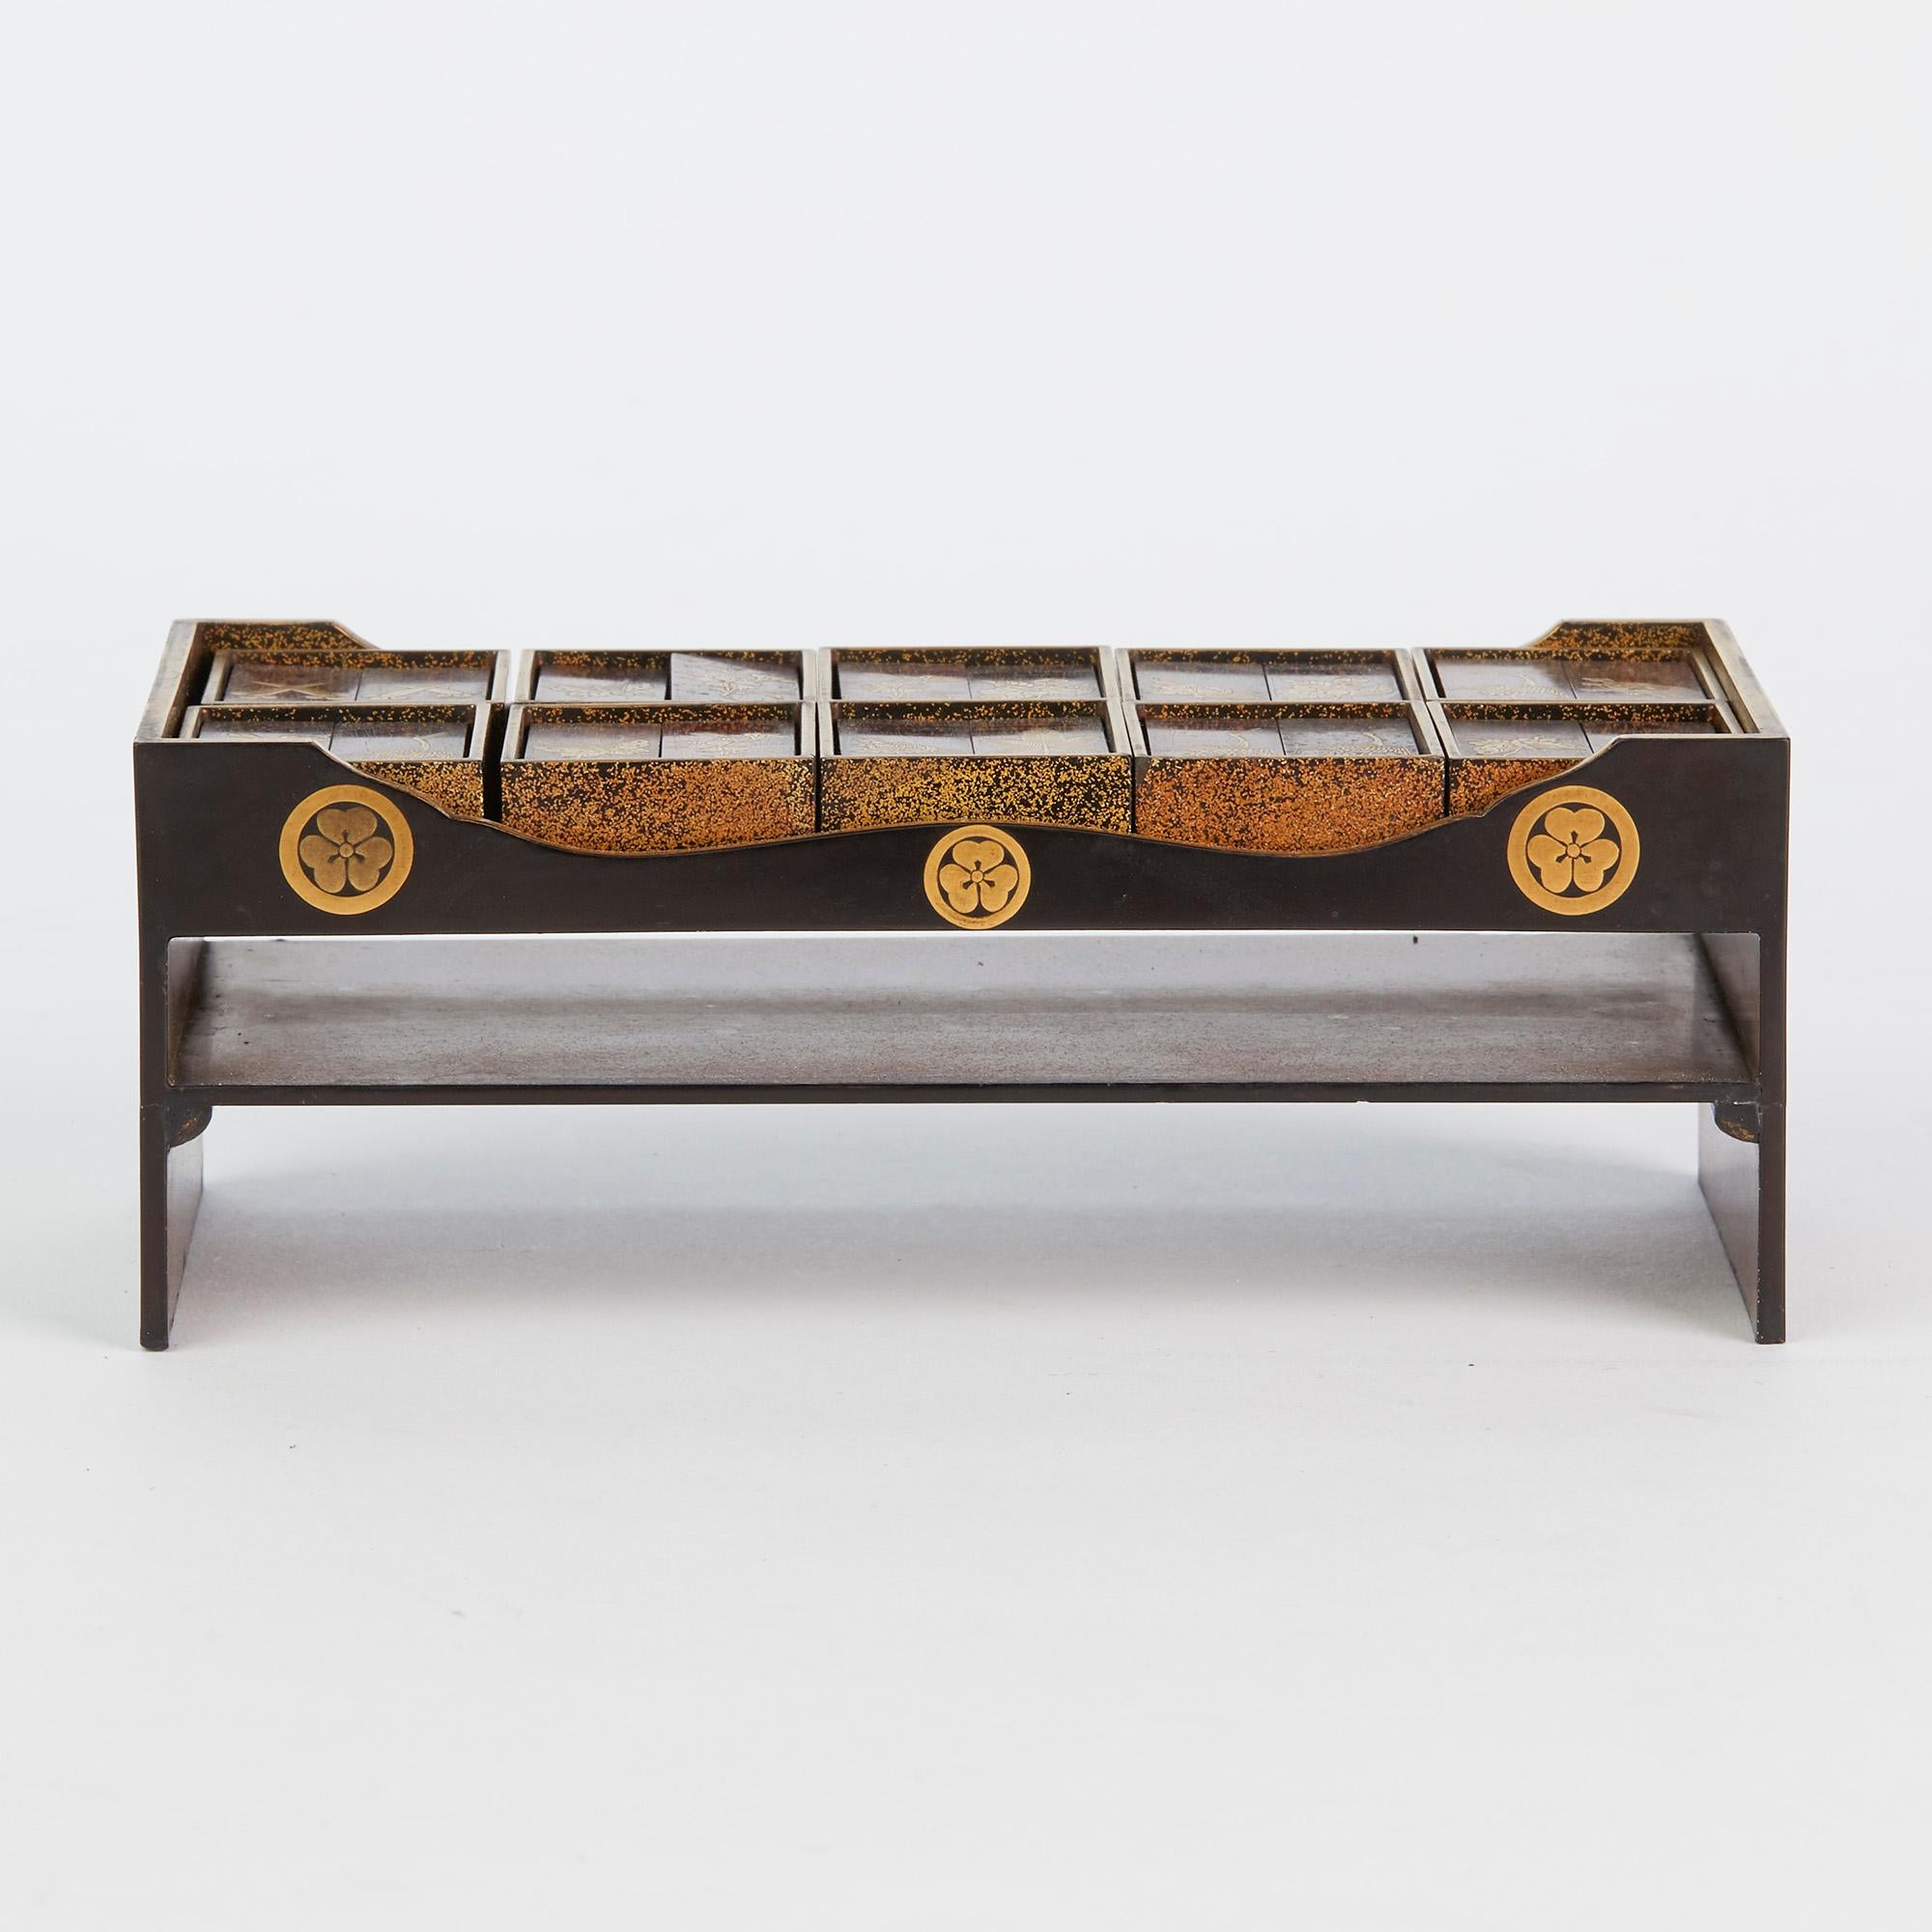 Japanese Rare Lacquered Wood Sensory Game, 19th Century 11